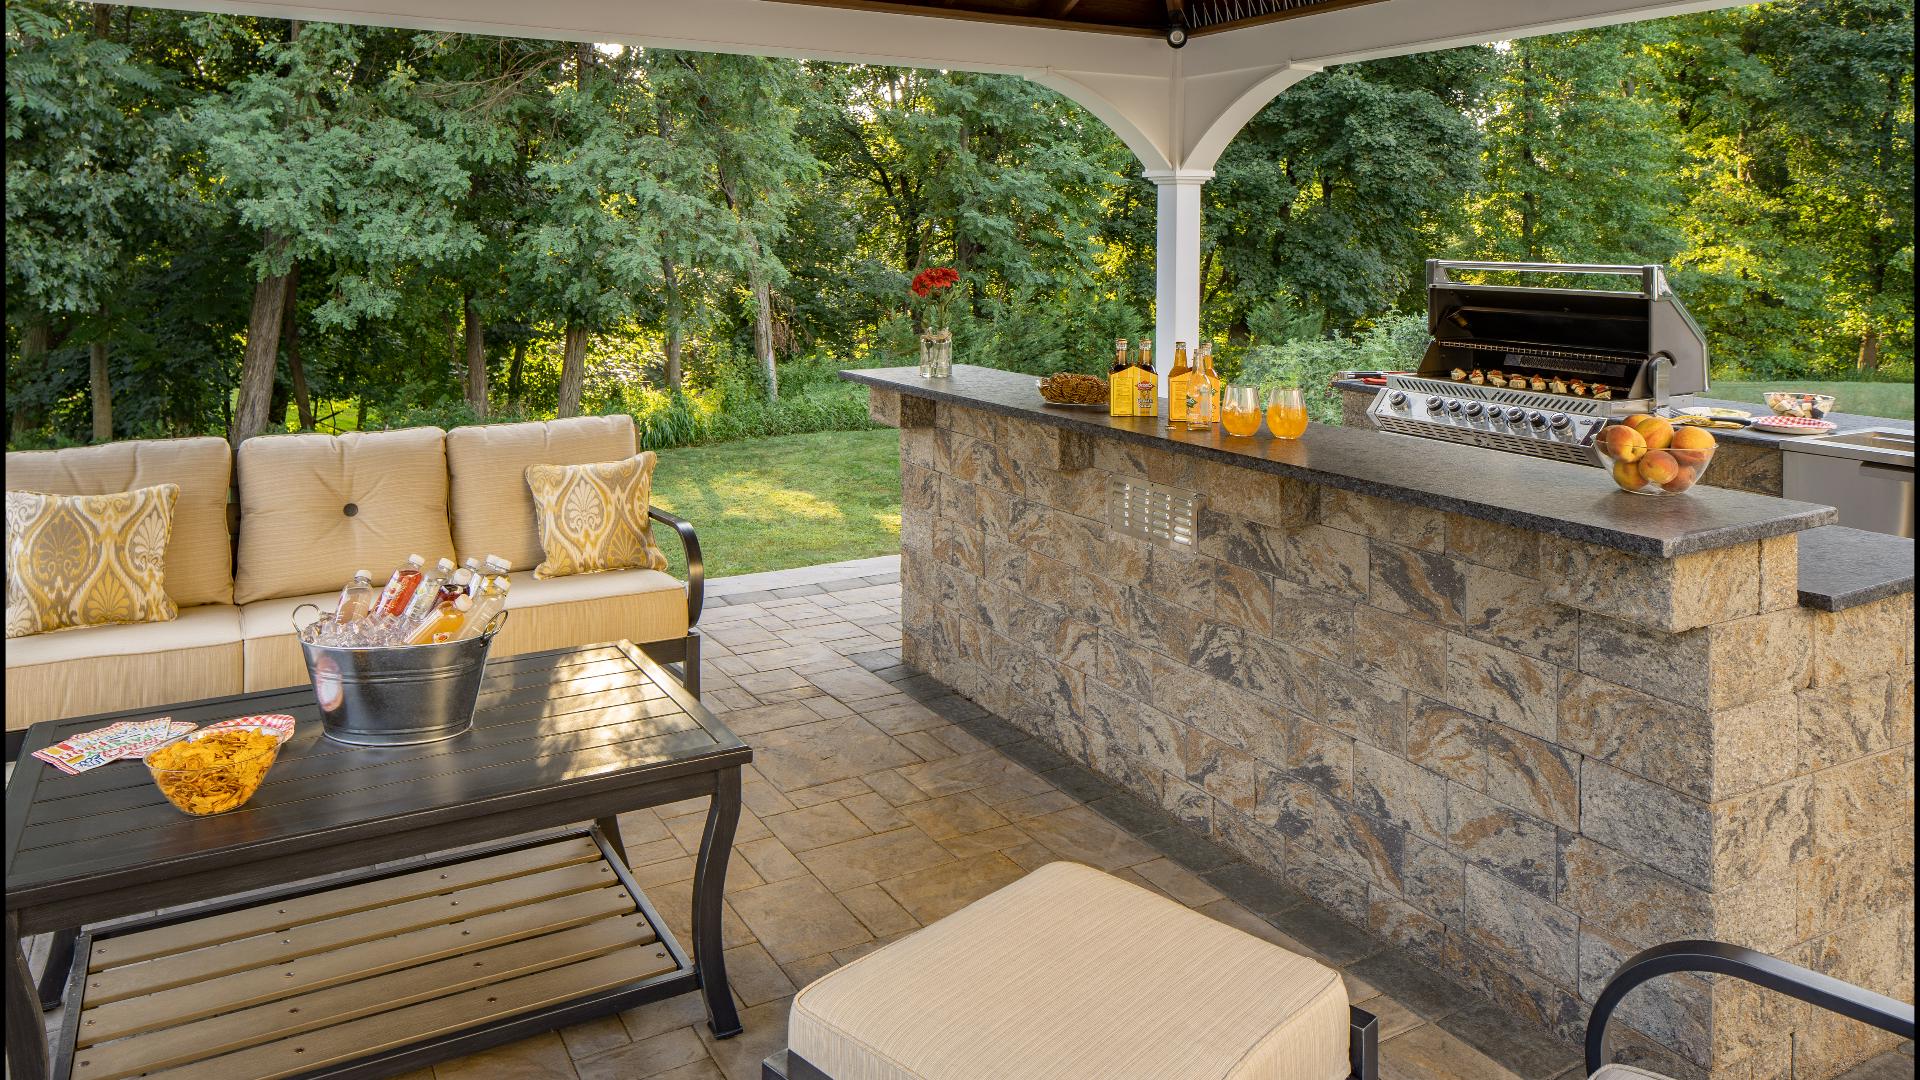 Sponsored by: Cambridge Pavers. Tis the time of year to enjoy your outdoor space! Find out how Cambridge Pavers can help you create a multifunctional oasis.